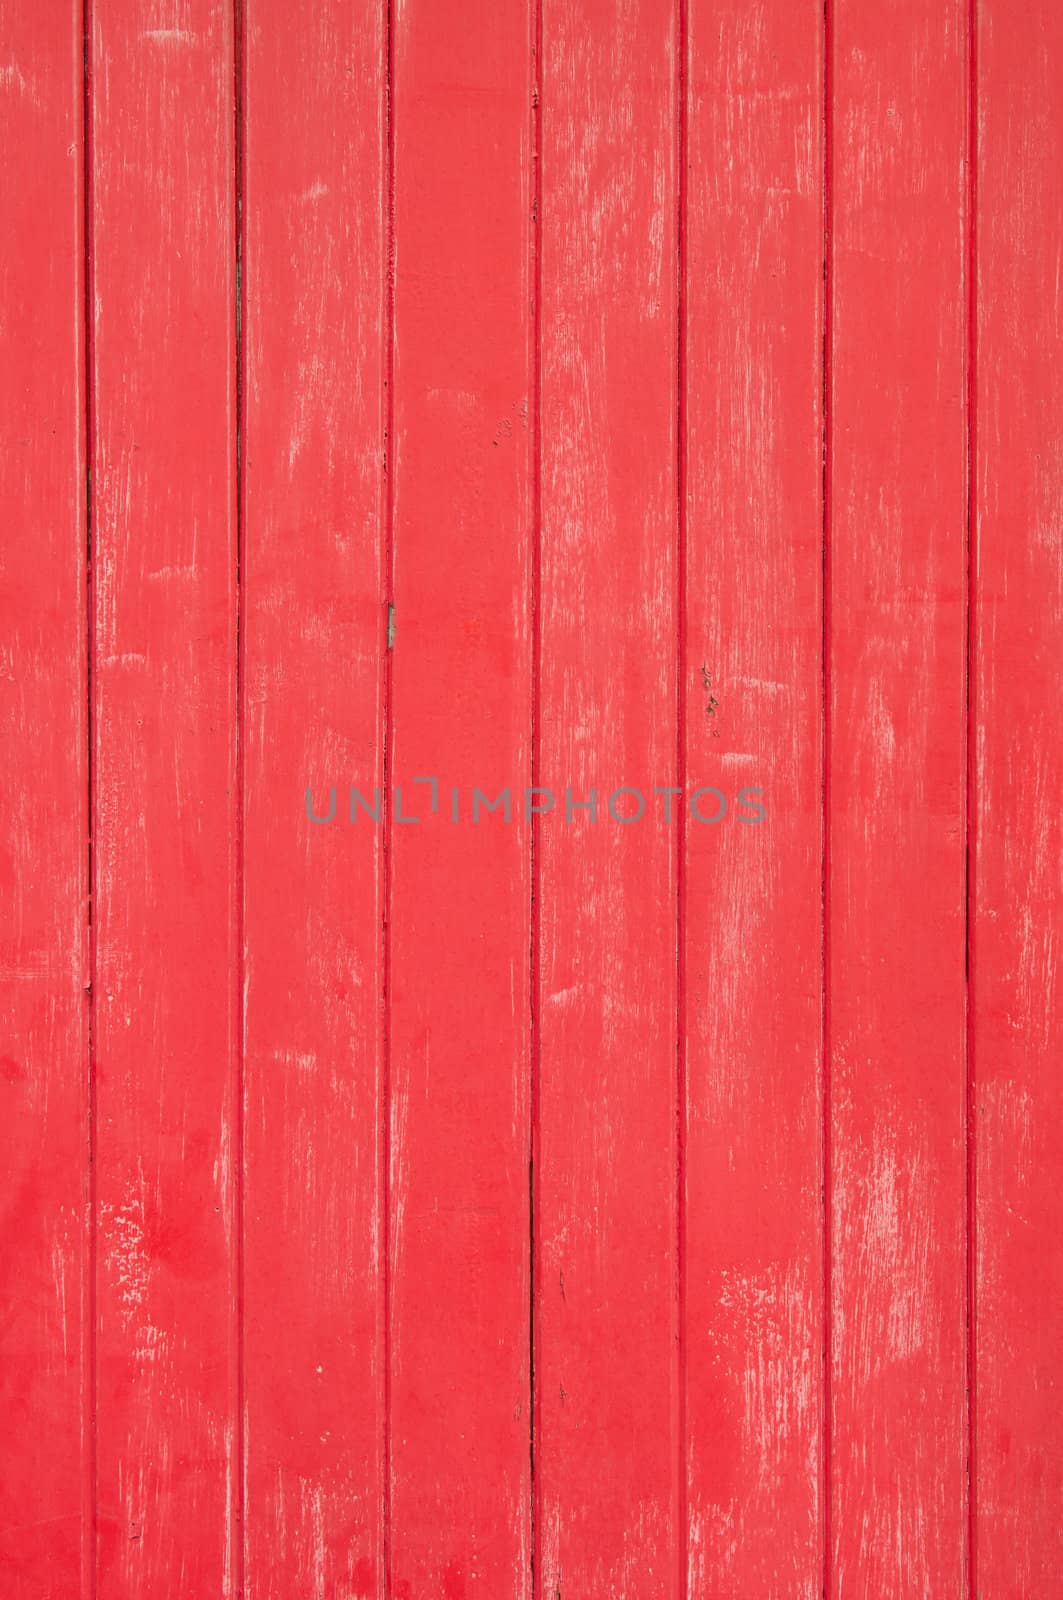 grunge red wooden planks as a background or texture